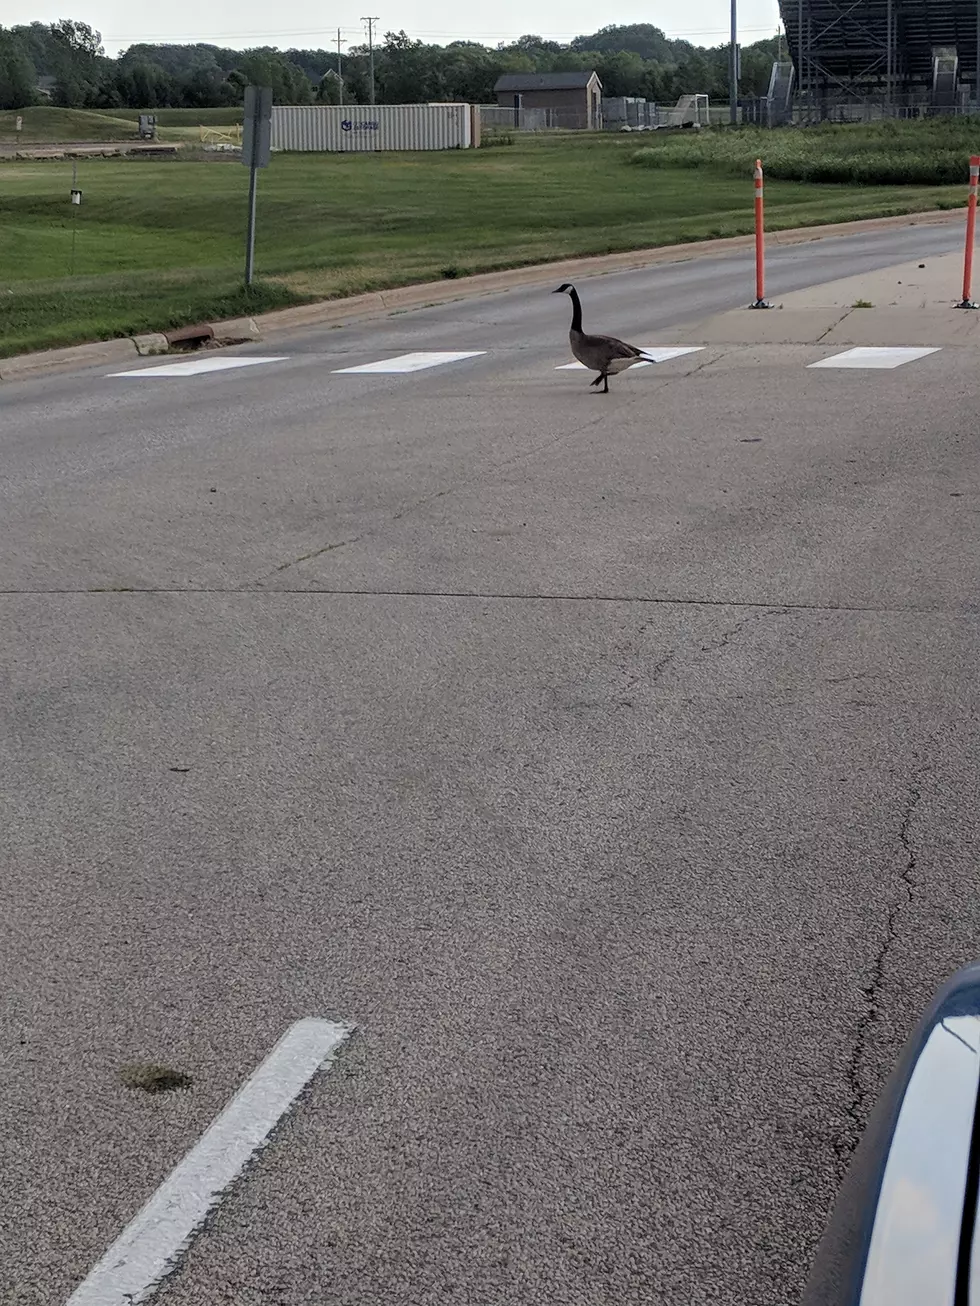 The Geese in Rochester Don’t Need Your Food